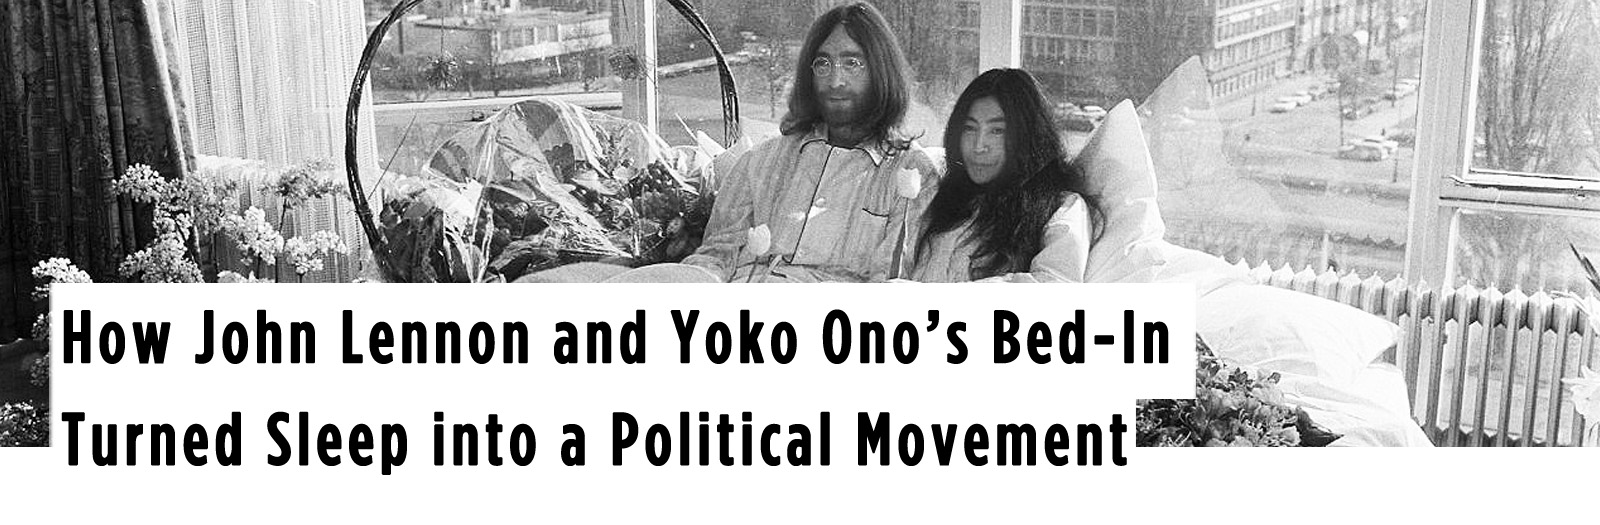 The Story of John Lennon and Yoko Onos Bed-In — Patricia Lawler Kenet